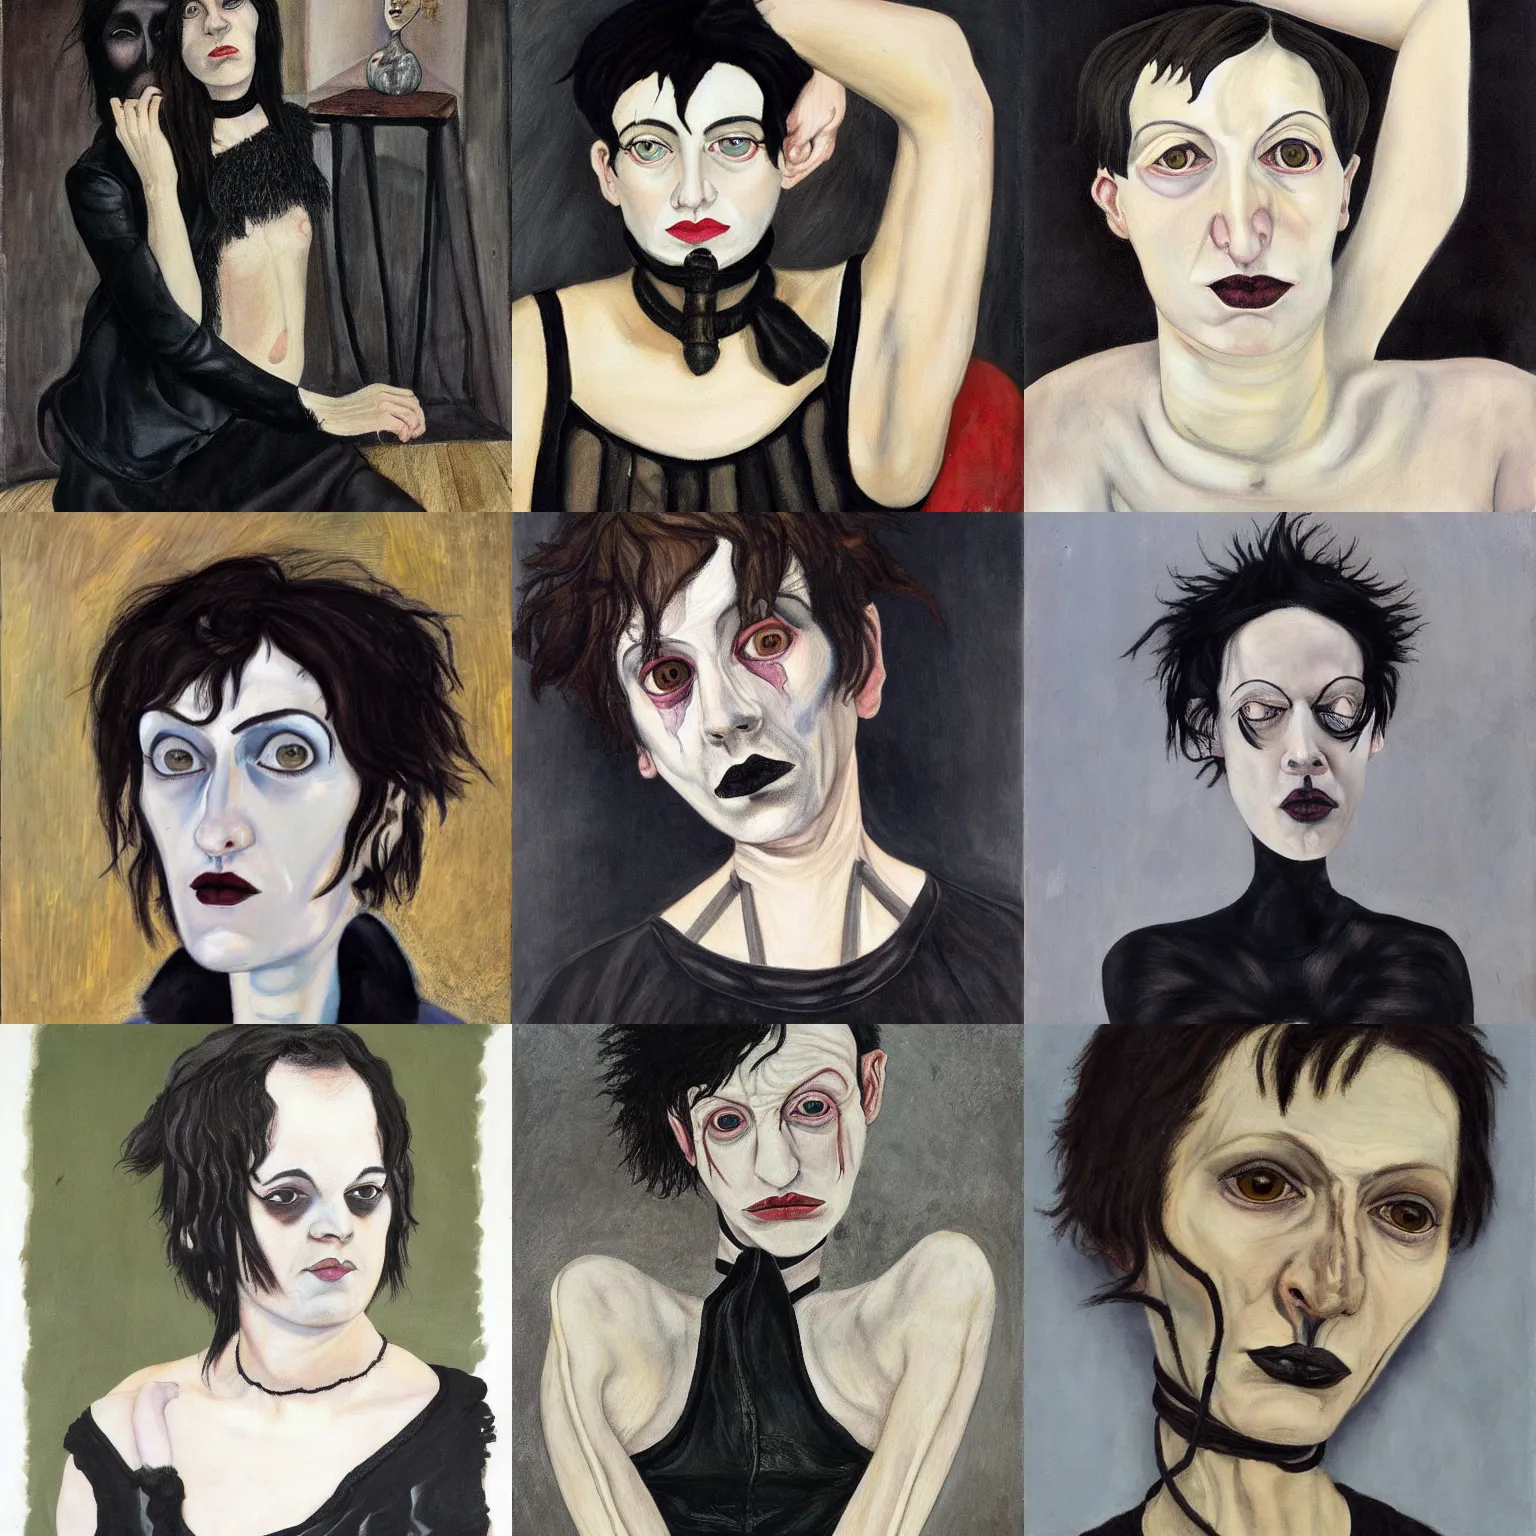 Prompt: A goth painted by Lucian Freud. Her hair is dark brown and cut into a short, messy pixie cut. She has a slightly rounded face, with a pointed chin, large entirely-black eyes, and a small nose. She is wearing a black tank top, a black leather jacket, a black knee-length skirt, a black choker, and black leather boots.